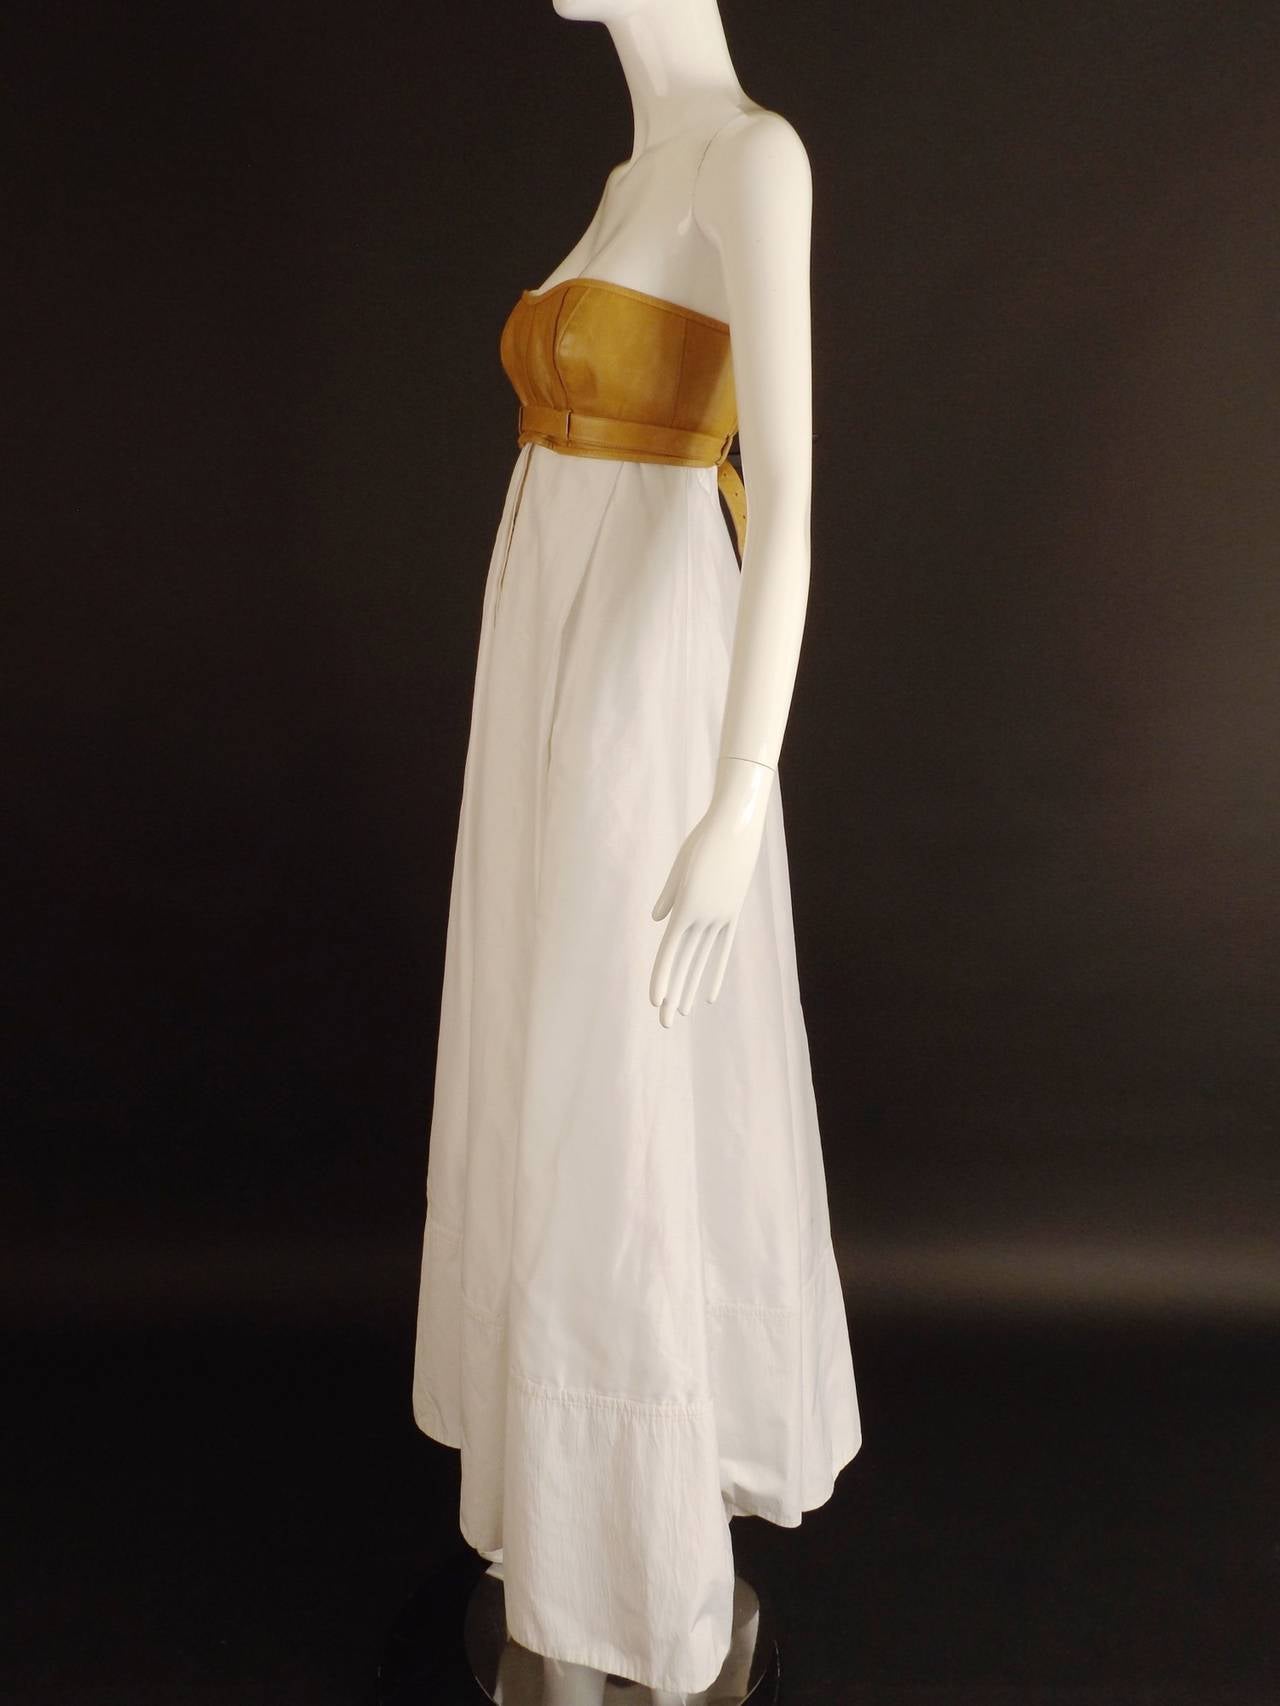 KAUFMANFRANCO-White Cotton & Leather Evening Dress, Size-6 In Excellent Condition For Sale In Dallas, TX